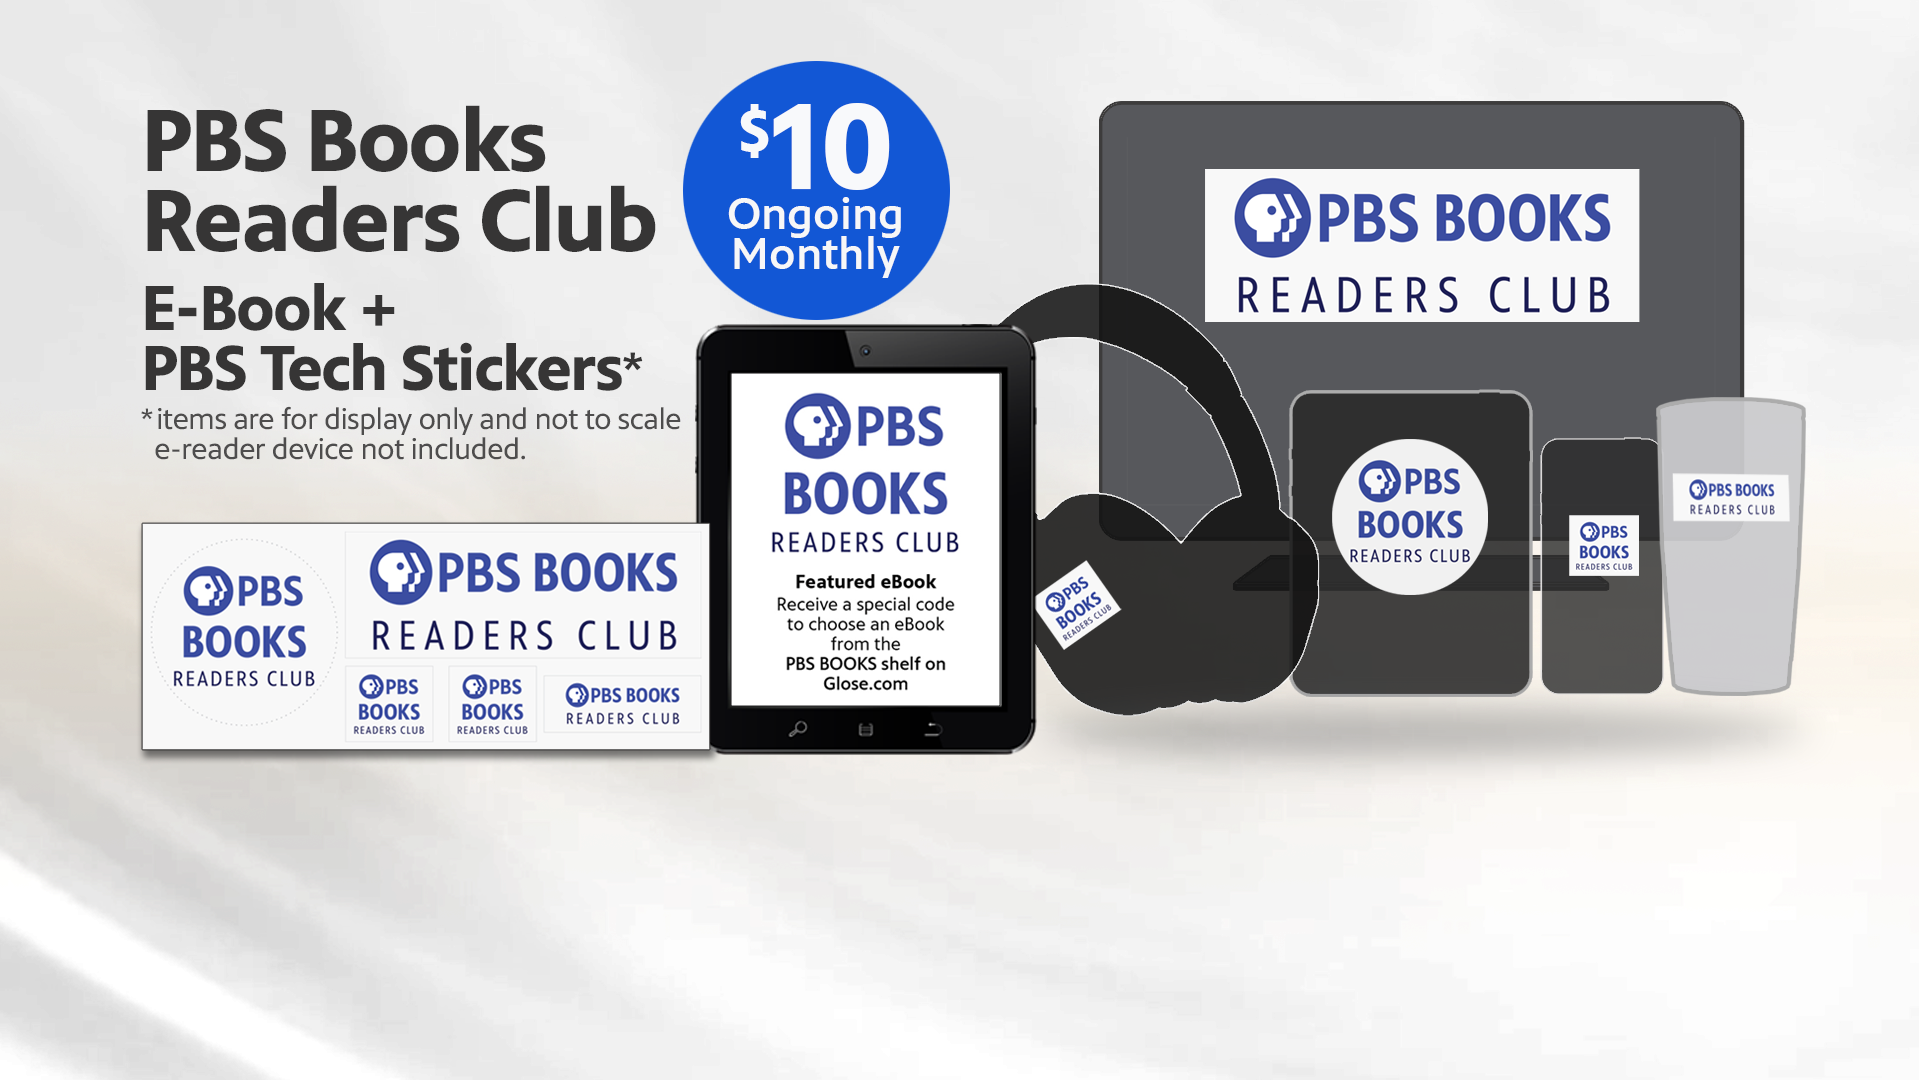 Donate $10 per month for an E-book + Stickers